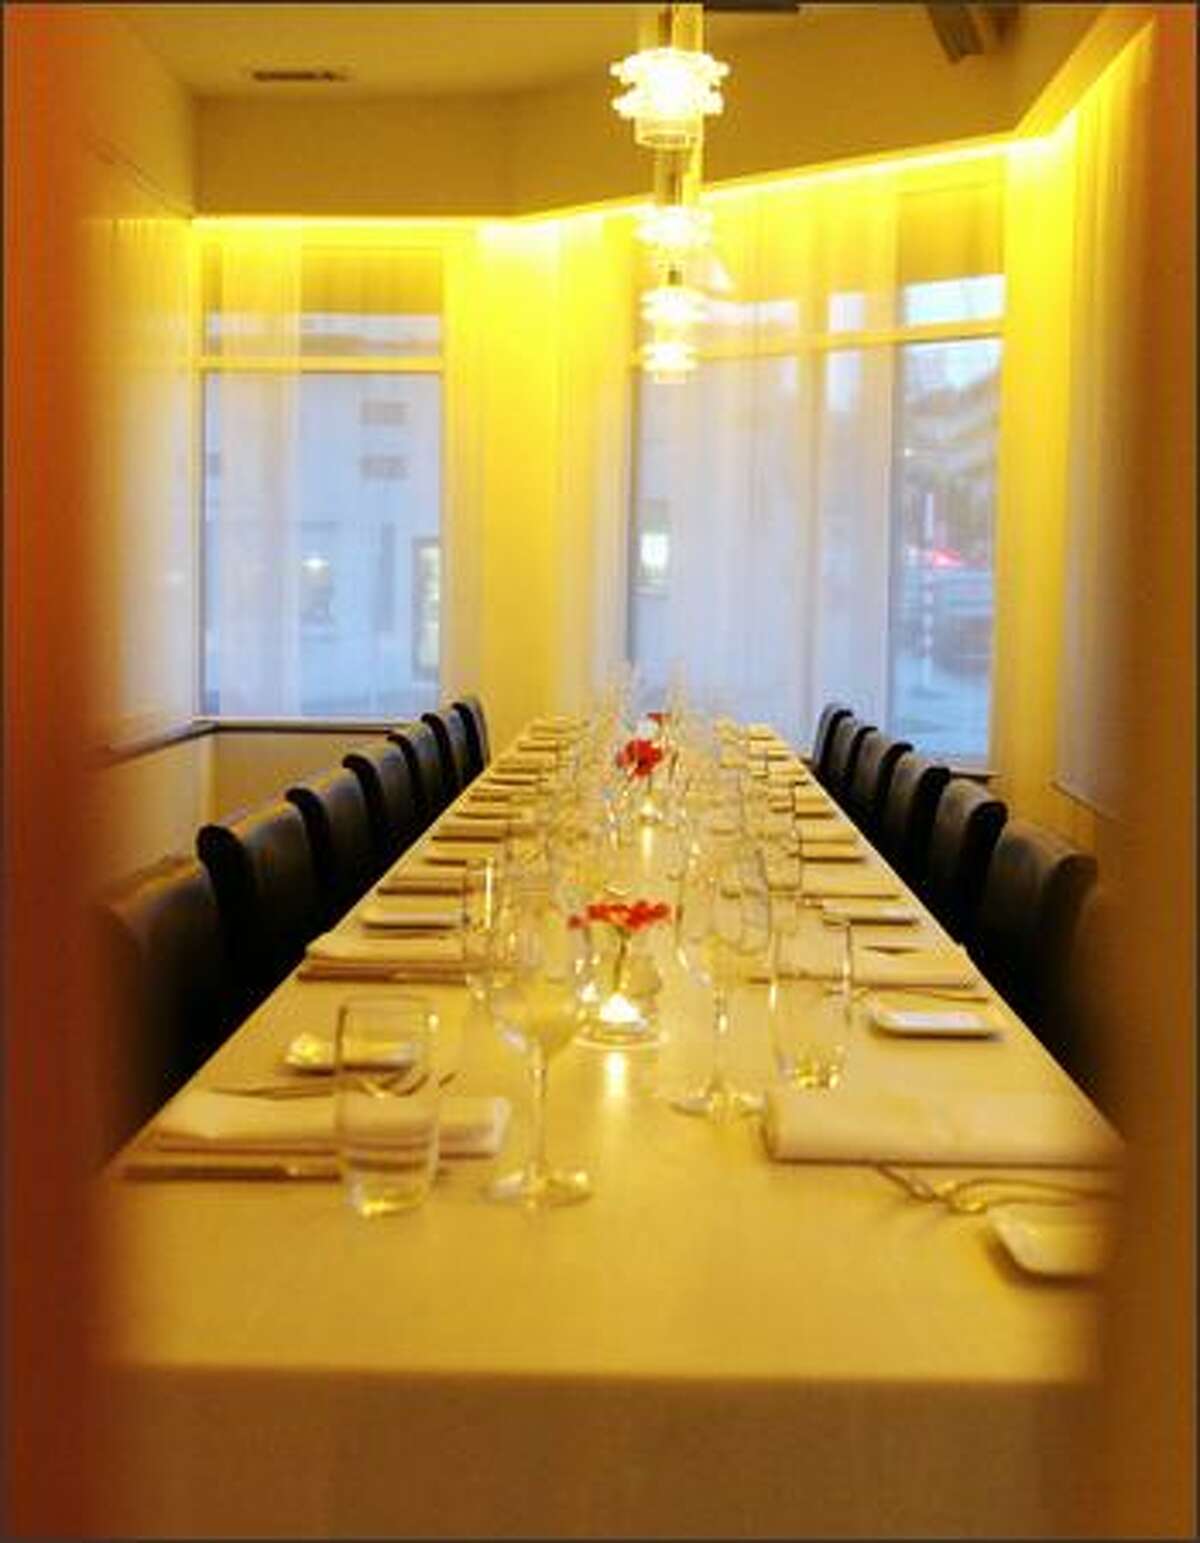 The raised communal table at Veil seems custom-fit for a bridal party. The gauzy curtains further evoke the theme.